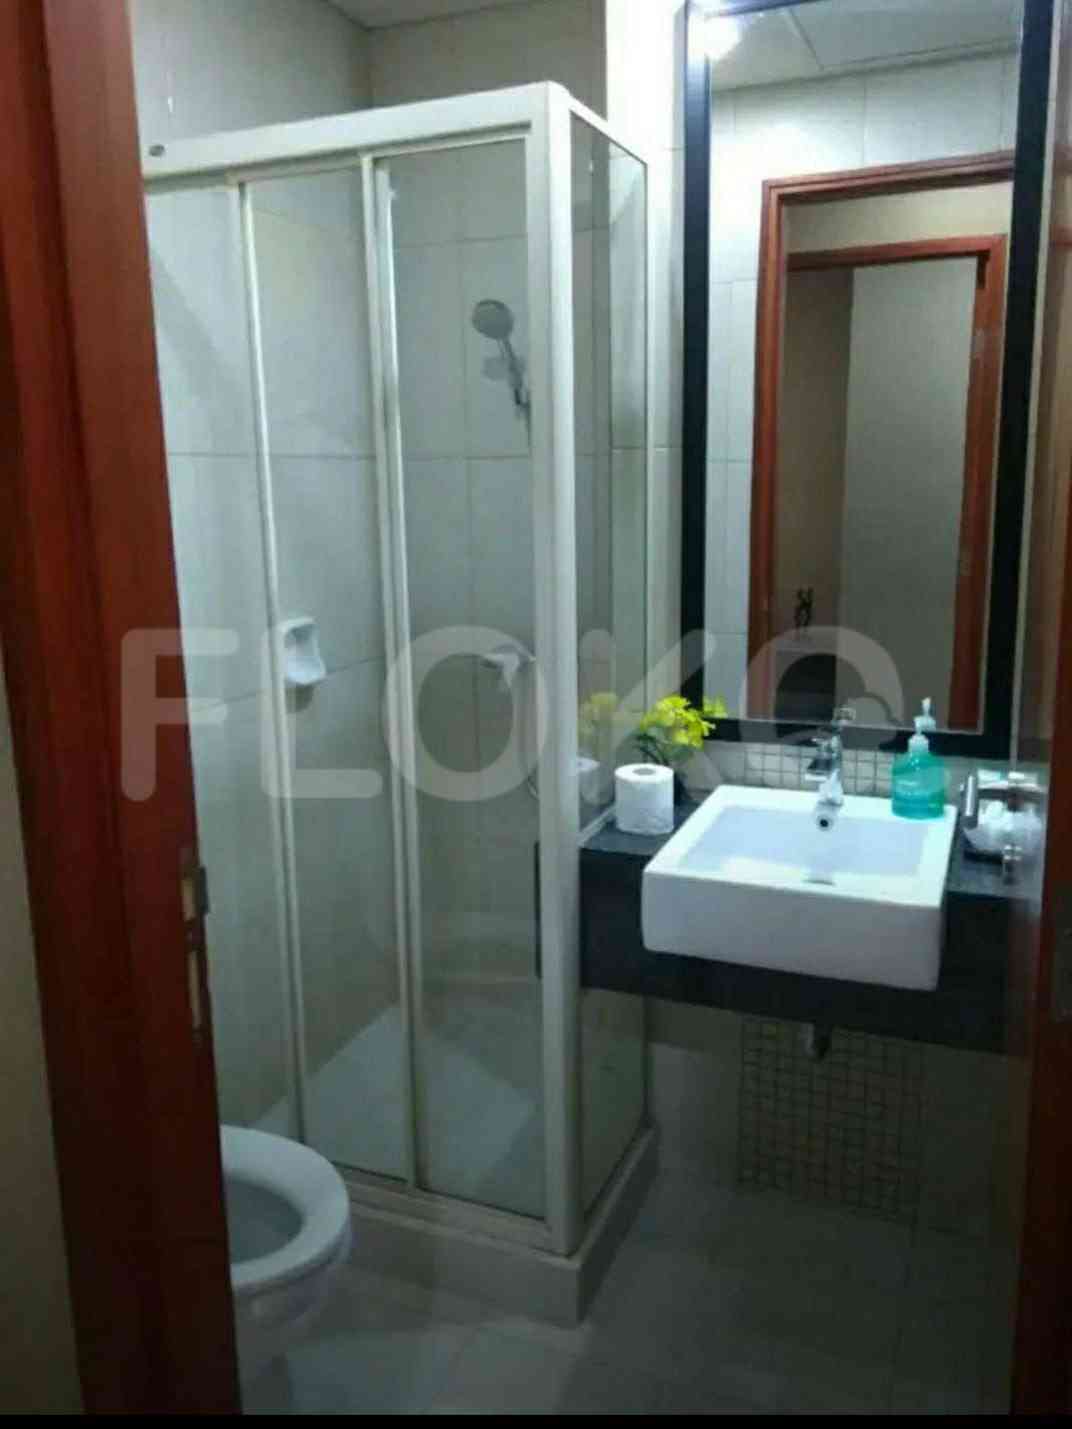 2 Bedroom on 15th Floor for Rent in Kuningan Place Apartment - fku817 5